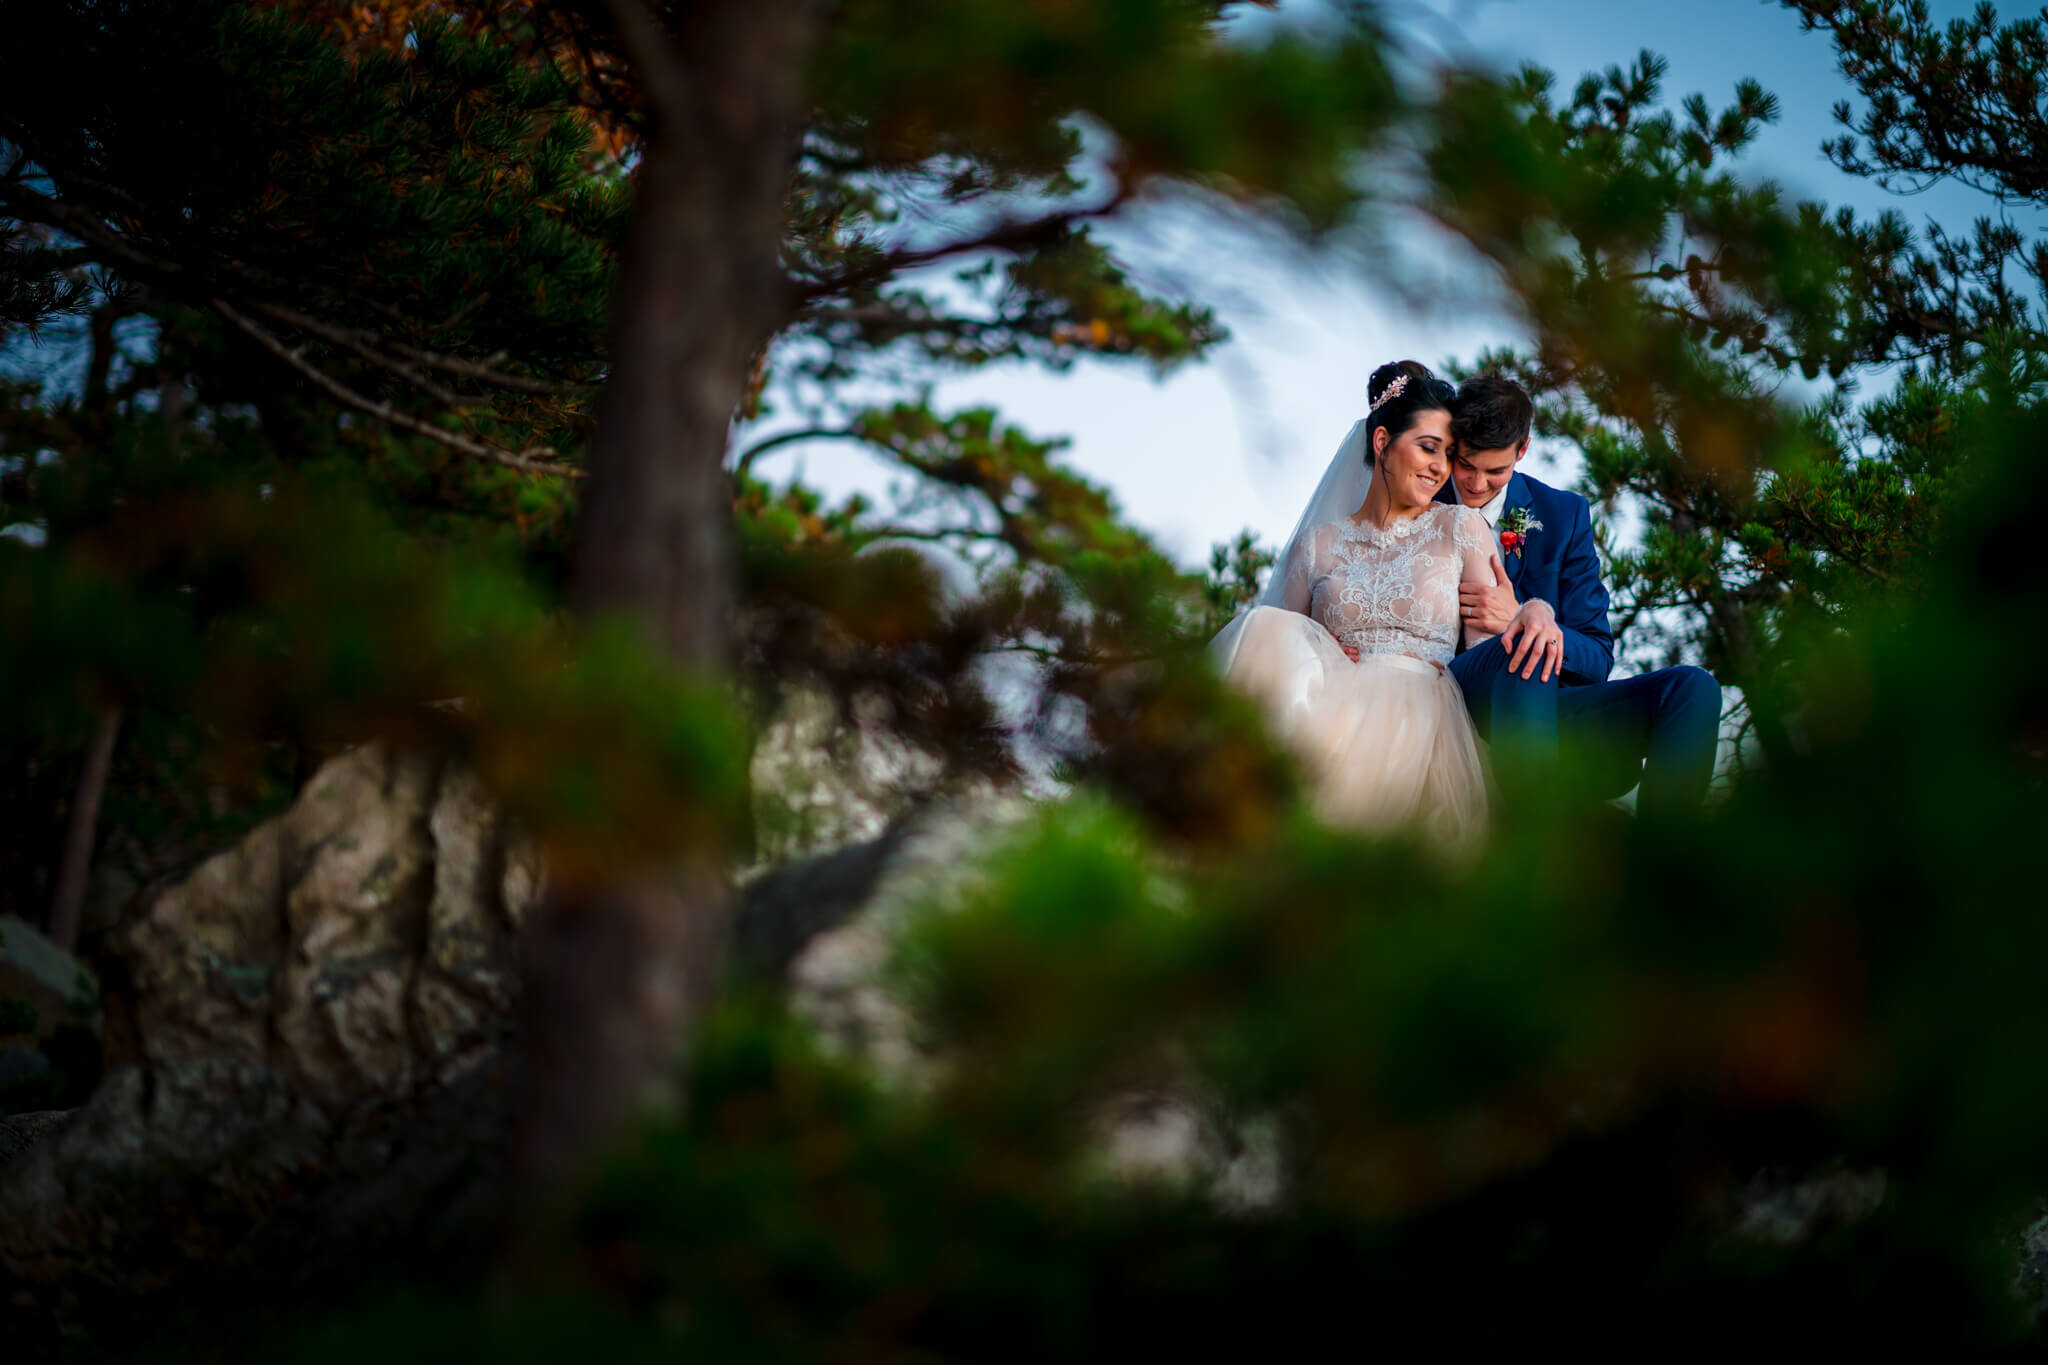 03-Ayla-Lee-Sugarloaf-Mountain-Elopement-Autumn-Wedding-Portraits-Photography-by-Bee-Two-Sweet-19.jpg